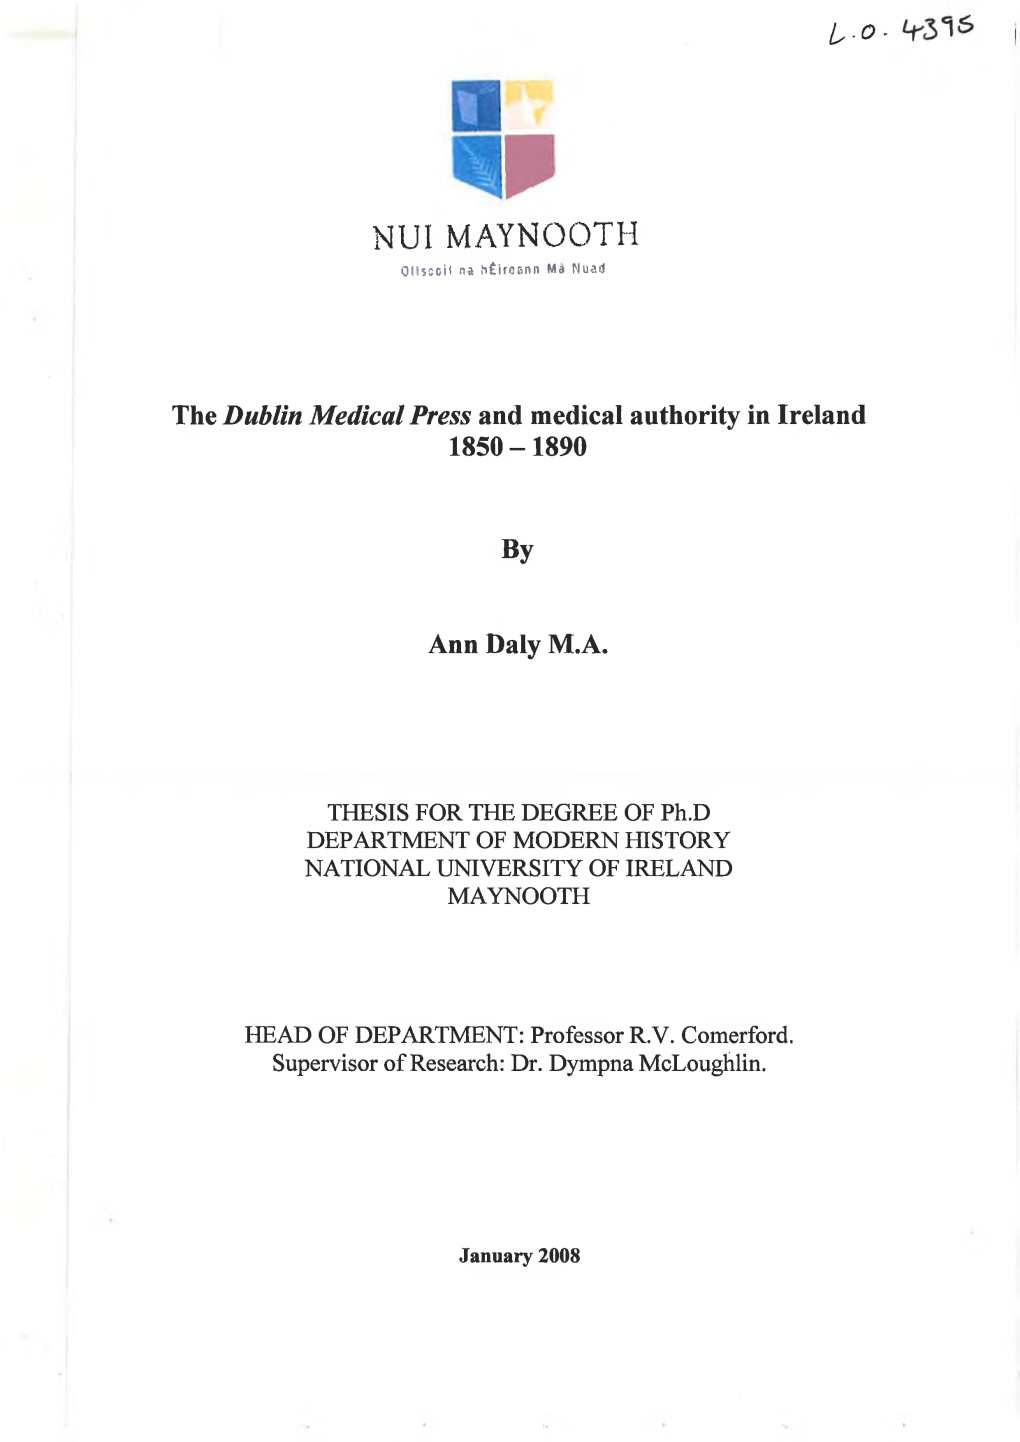 The Dublin Medical Press and Medical Authority in Ireland 1850 -1890